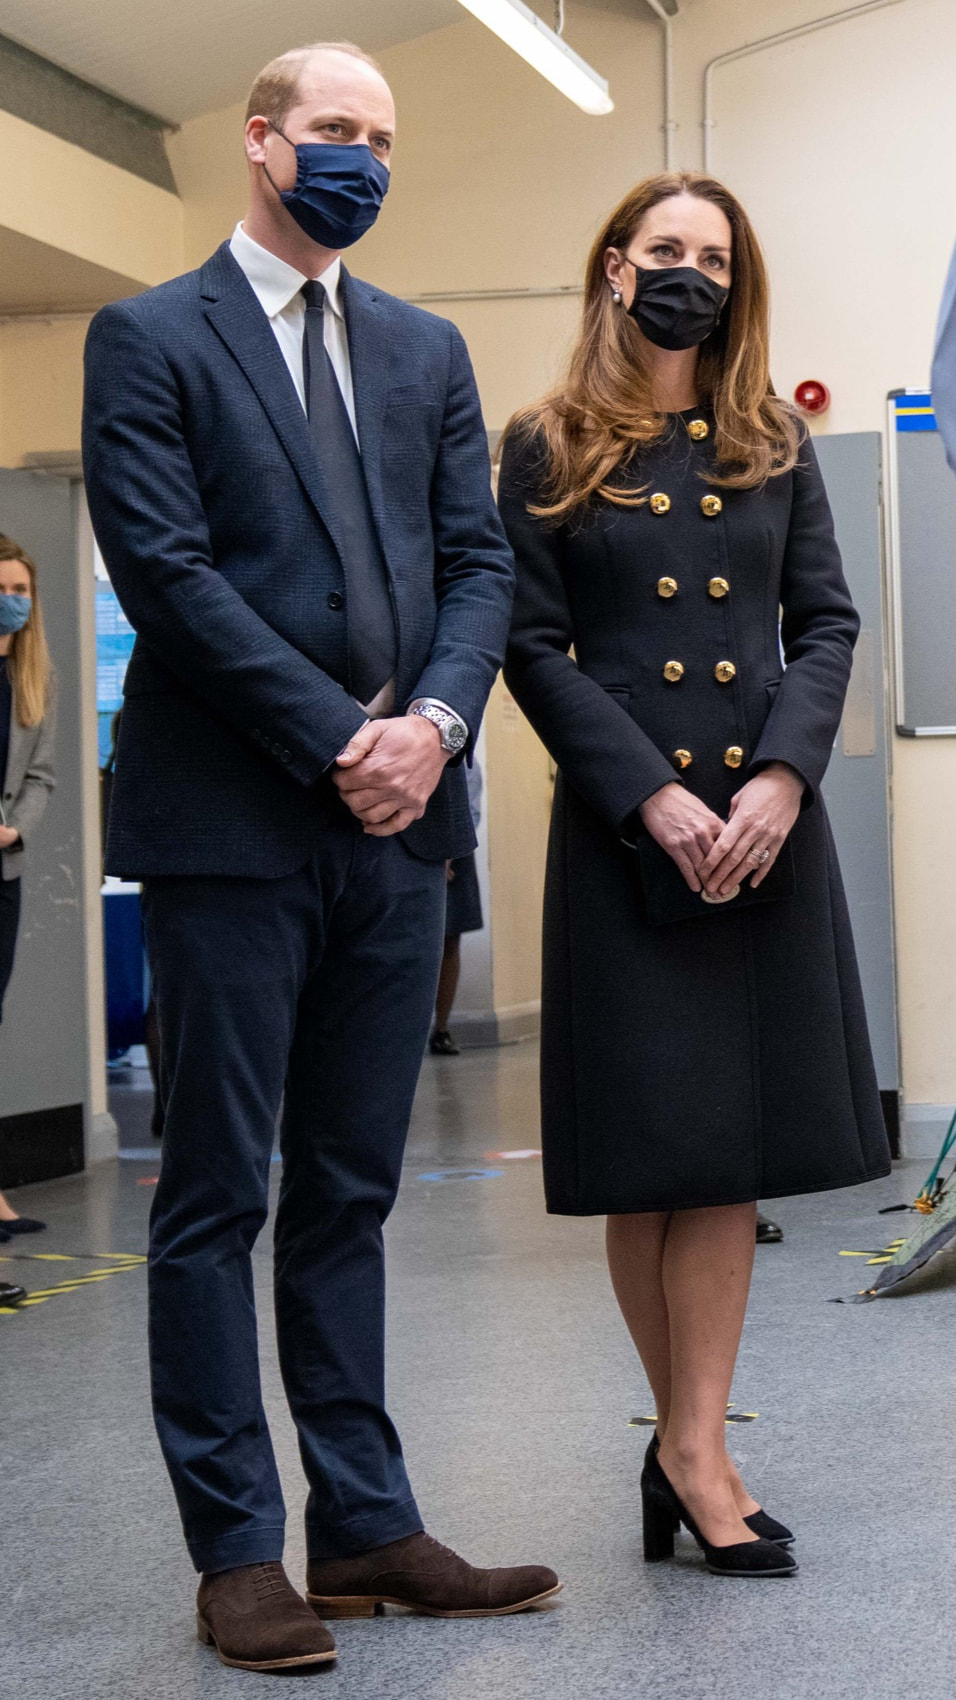 The Duke and Duchess of Cambridge visited the 282 (East Ham) Squadron in London to pay tribute to Prince Philip, who served as Air Commodore-in-Chief of the Royal Air Force (RAF) Air Cadets on 22 April 2021